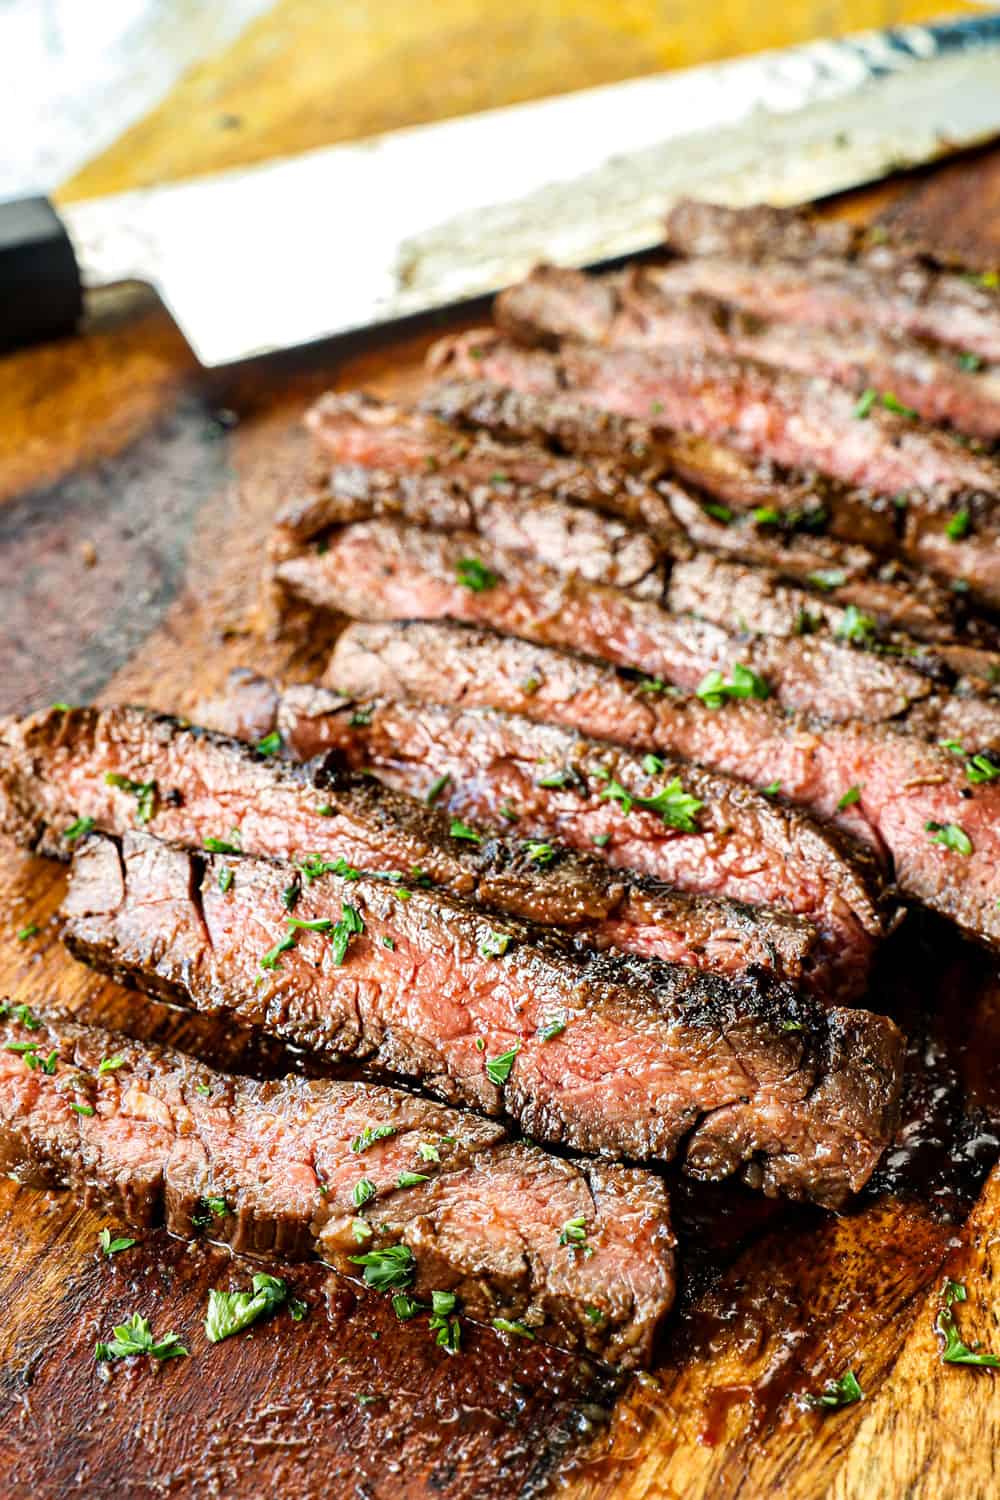 marinated skirt steak recipe sliced on the cutting board showing how juicy and tender it is